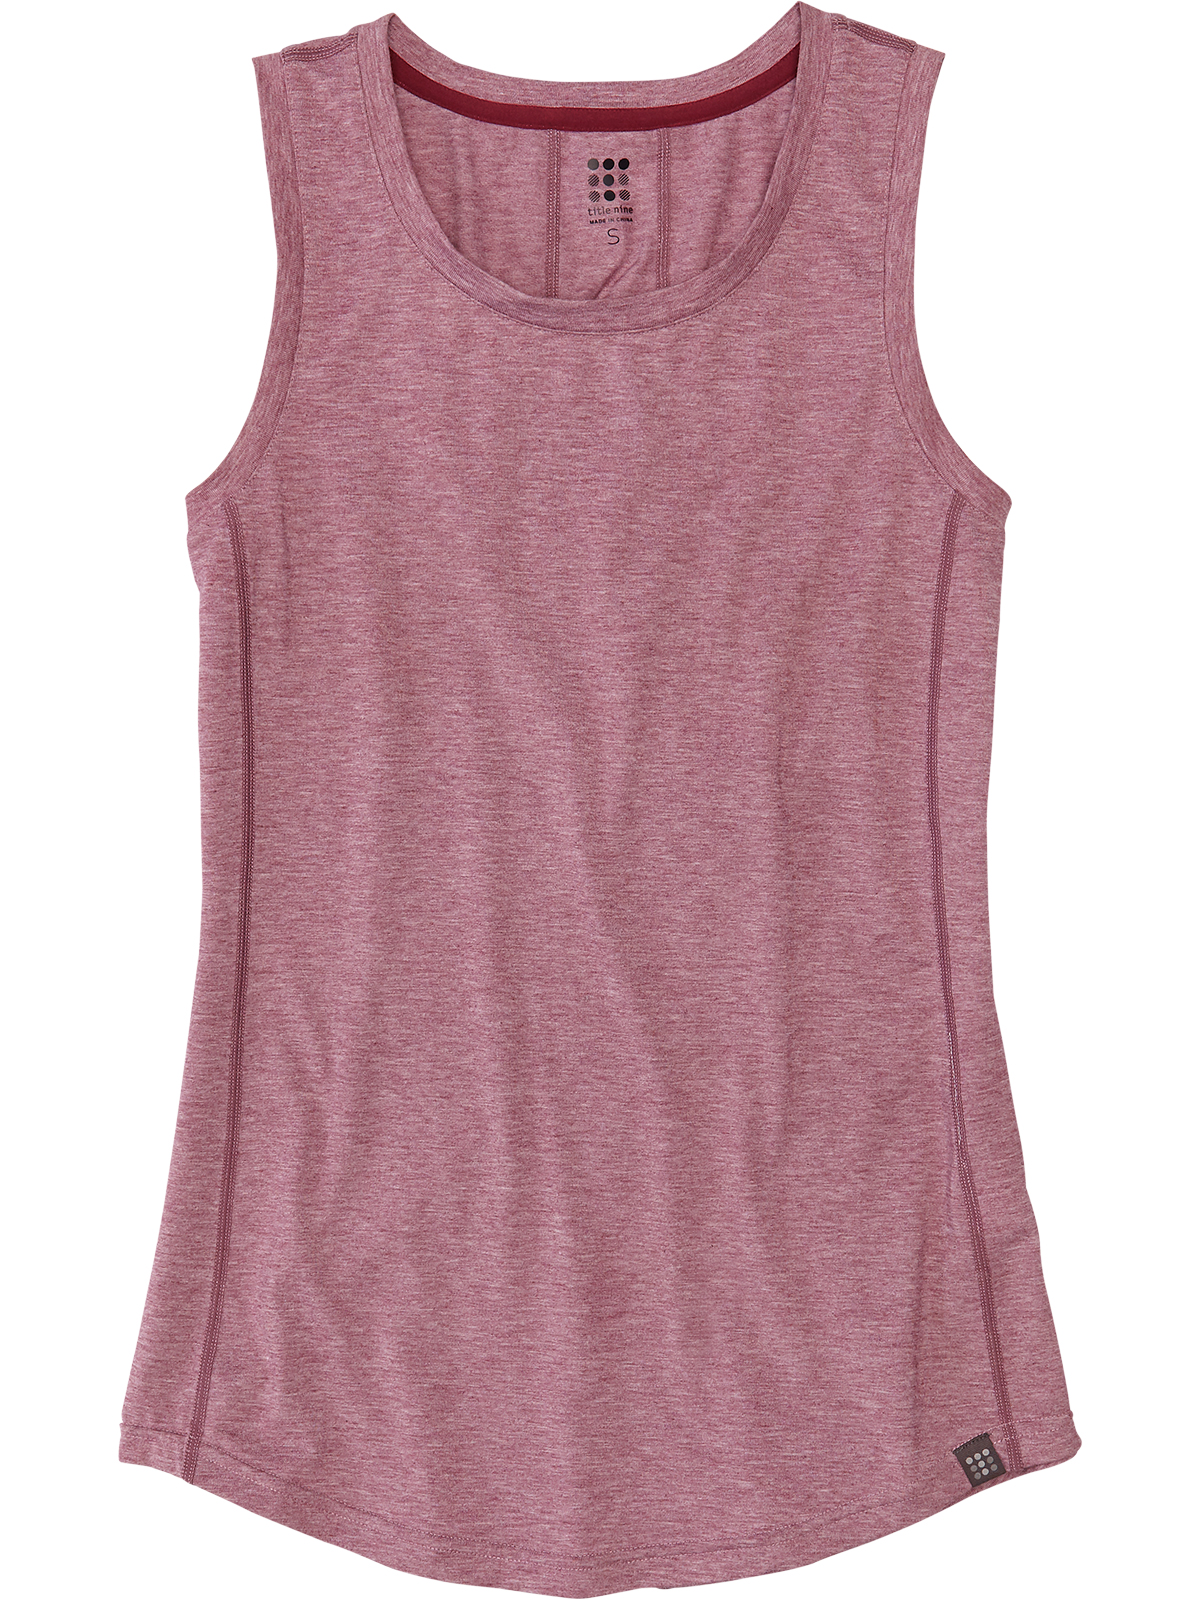 Vibe Tank Top - Solid Color Tank for Women